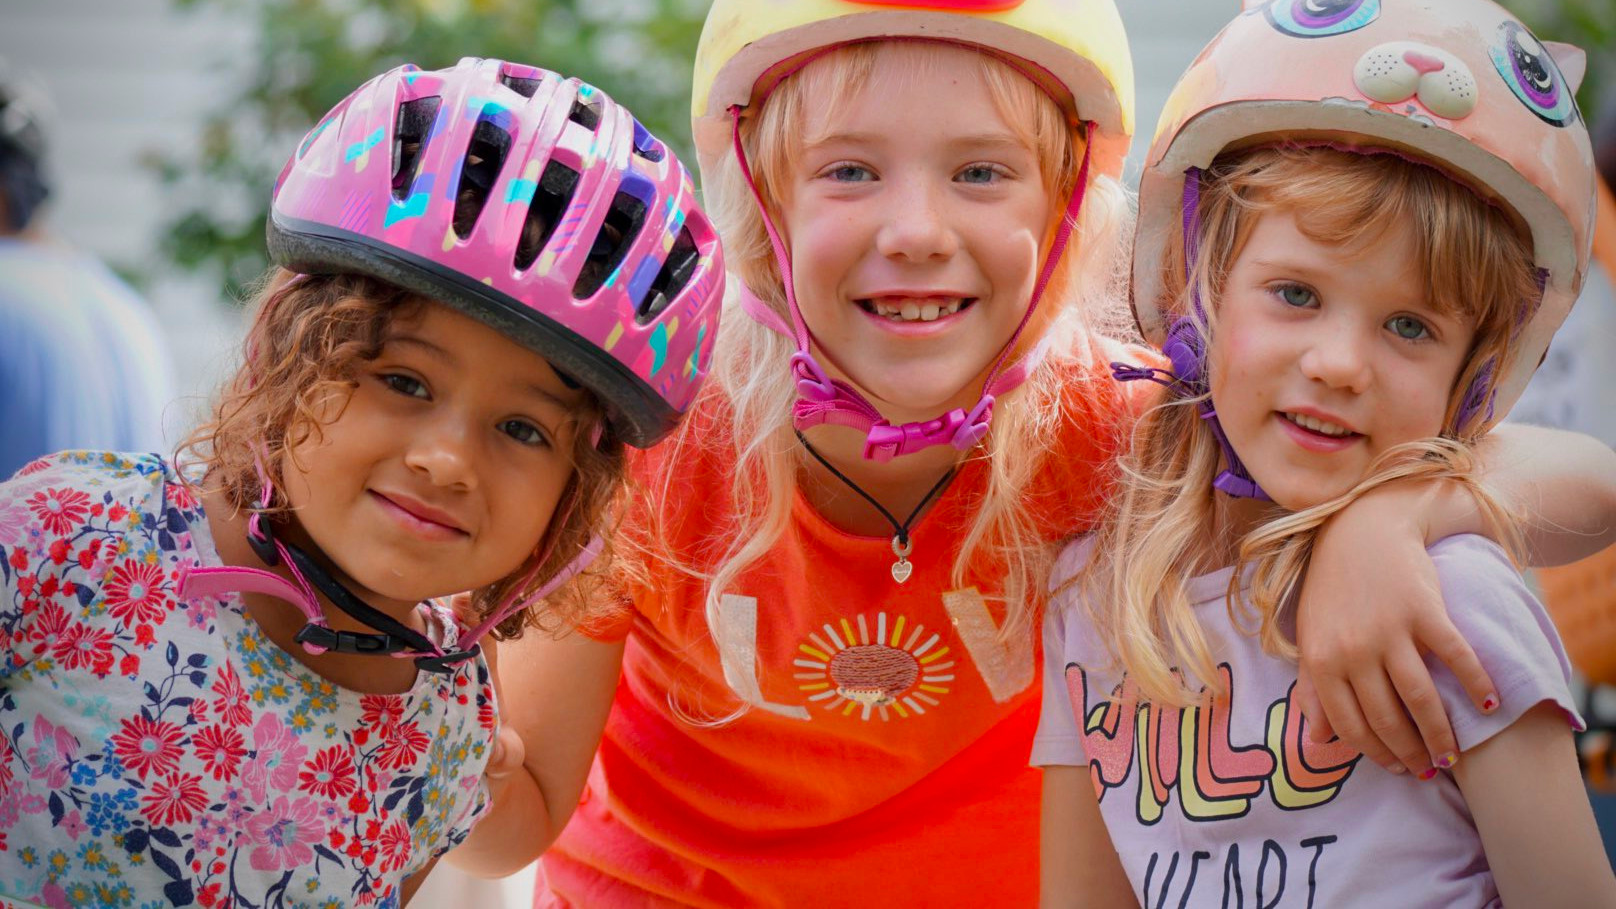 A closeup of three young girls who are leaning in close together and have their arms over each others’ shoulders. The girl on the left has light brown skin, brown curly hair, and is wearing a pink bike helmet and a tshirt with flowers on it. The girl in the middle has white skin, blond hair, and is wearing a yellow bike helmet with a unicorn face and horn on it. Her smile shows that she is missing a few of her front teeth. She is wearing a bright orange tshirt. The girl on the right has white skin, light brown hair and is wearing a light pink bike helmet that has an animal face and cat ears on it. She is wearing a light purple tshirt with some text on it.